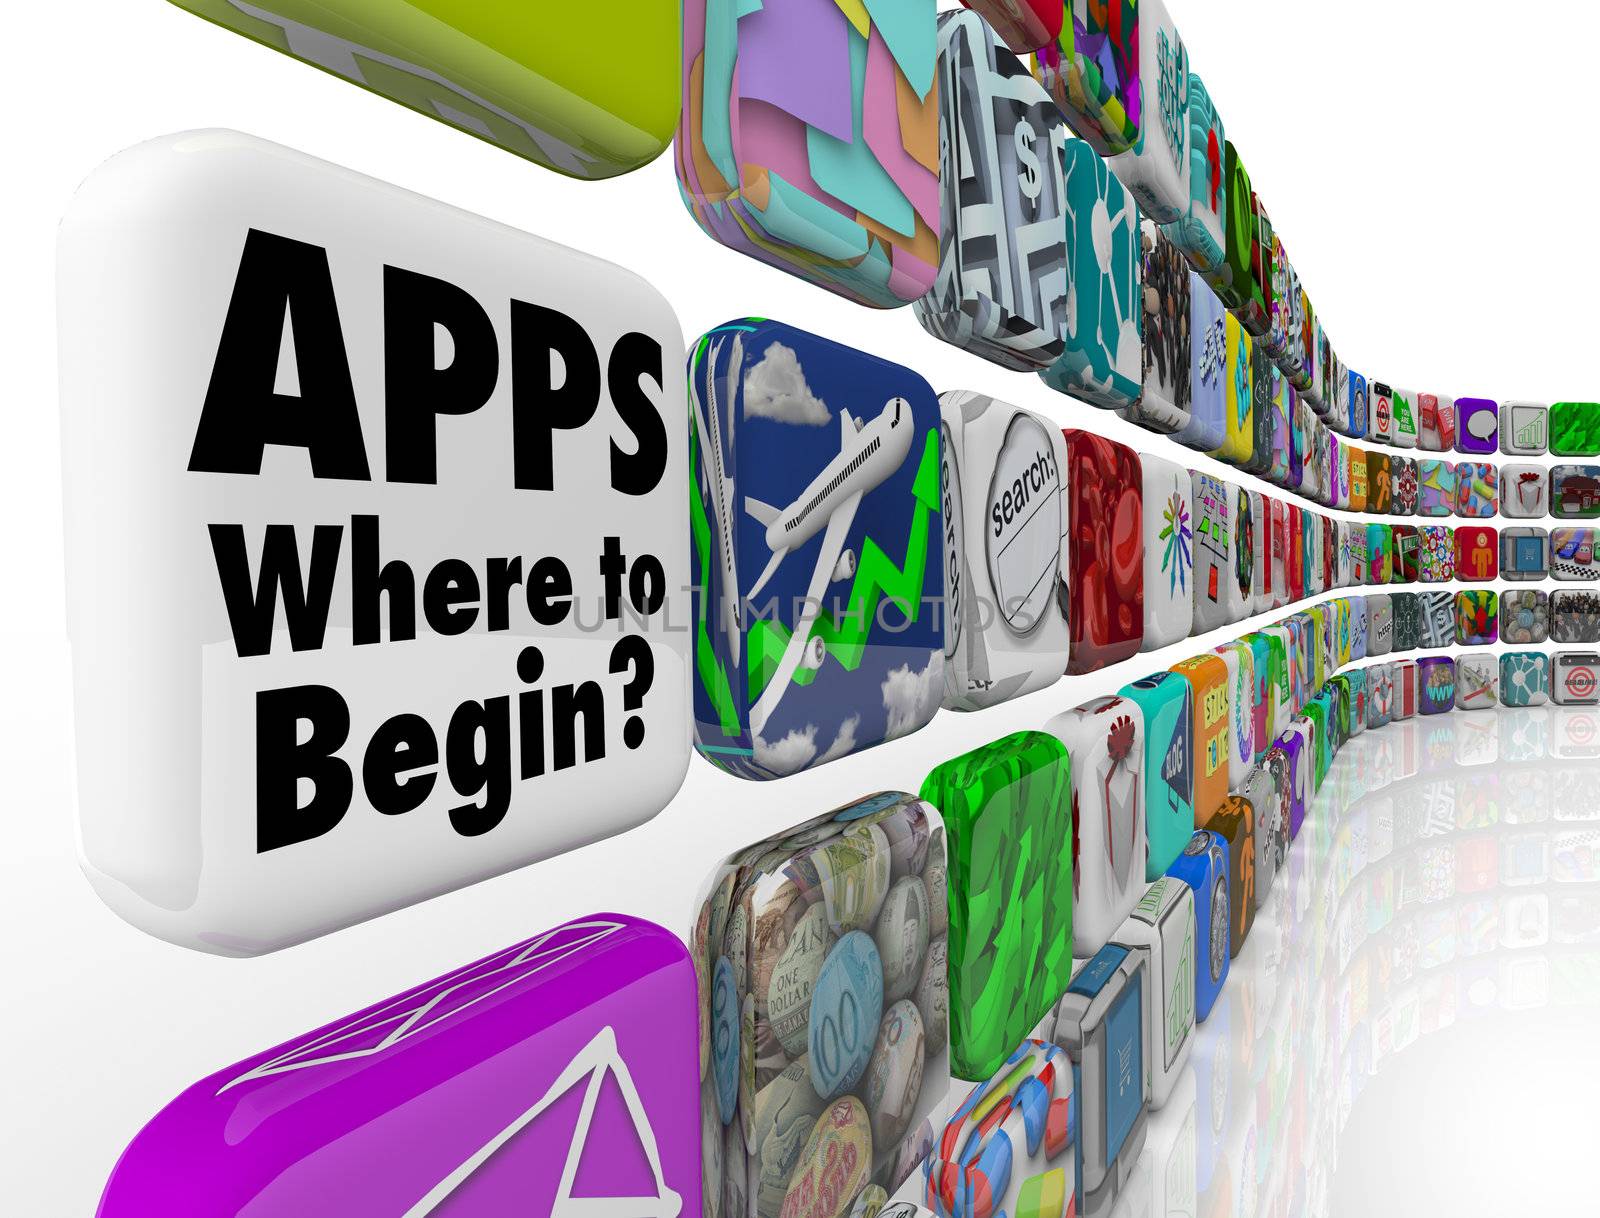 The words Apps - Where to Begin asking if you need help choosing the best app programs or software to put on your mobile device or smart phone, or how to develop applications